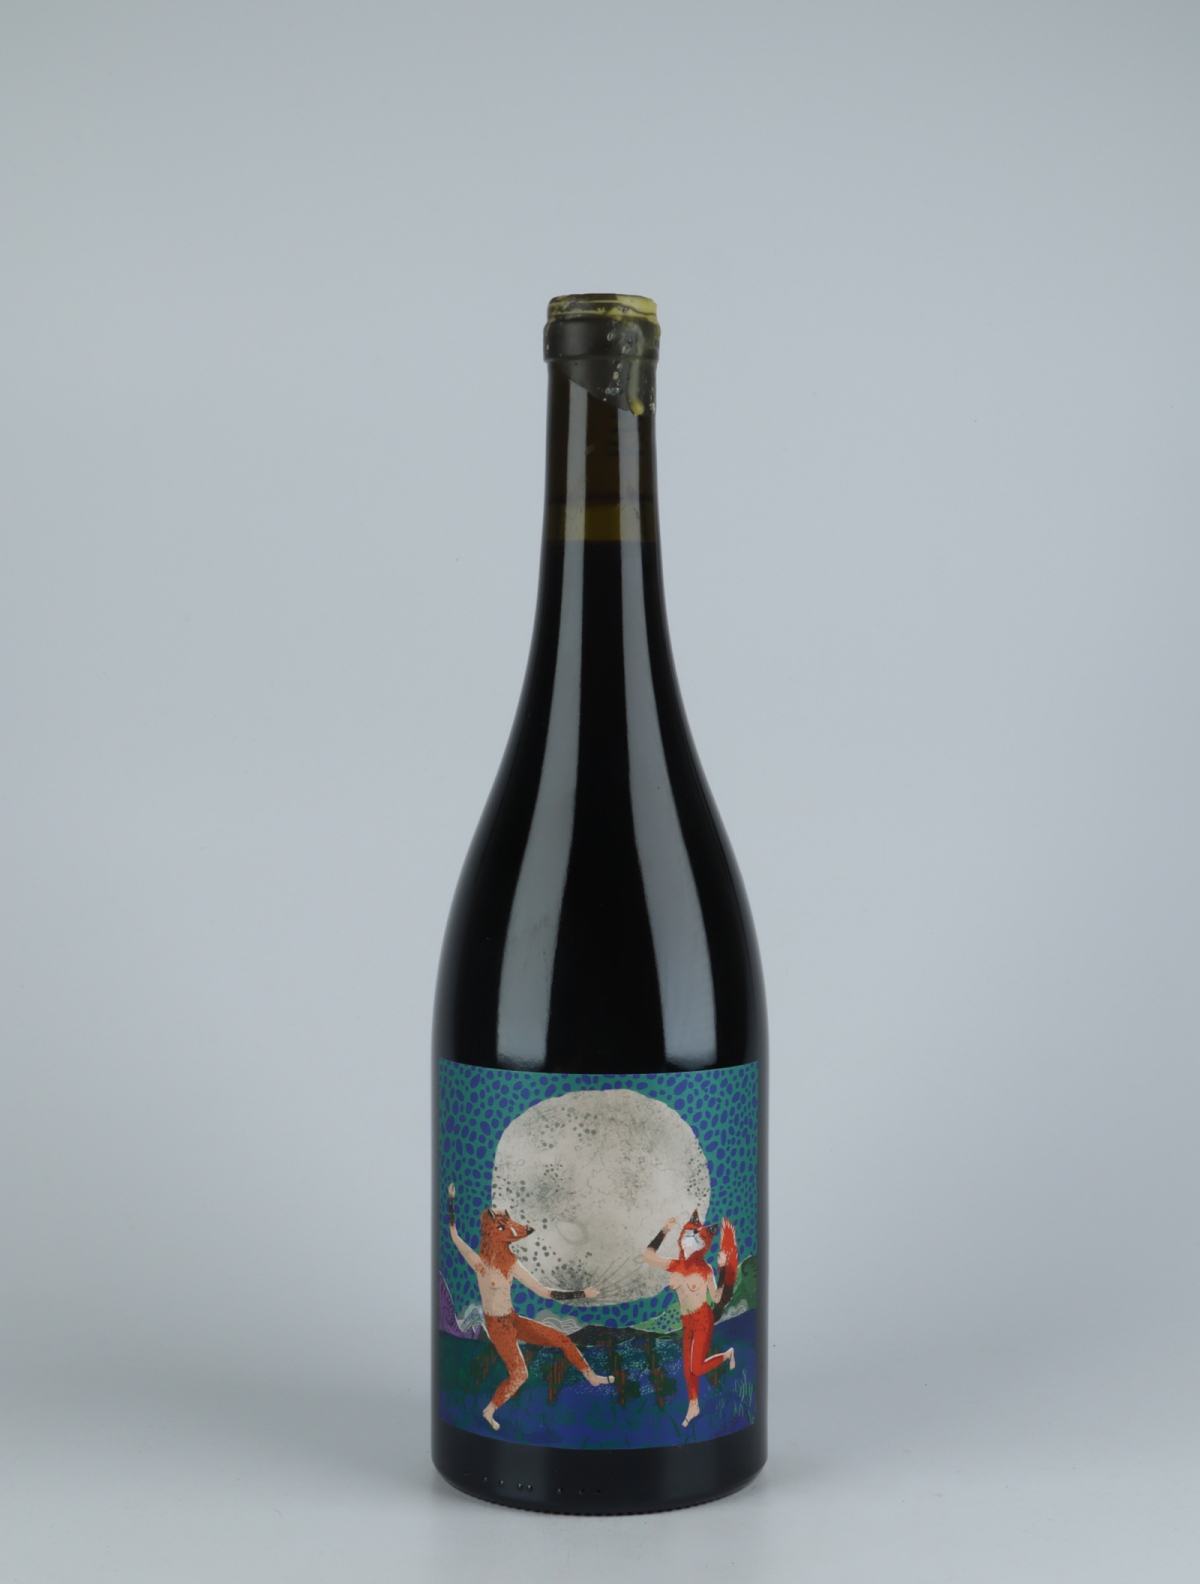 A bottle 2020 Luna Llena Red wine from , Nelson in New Zealand